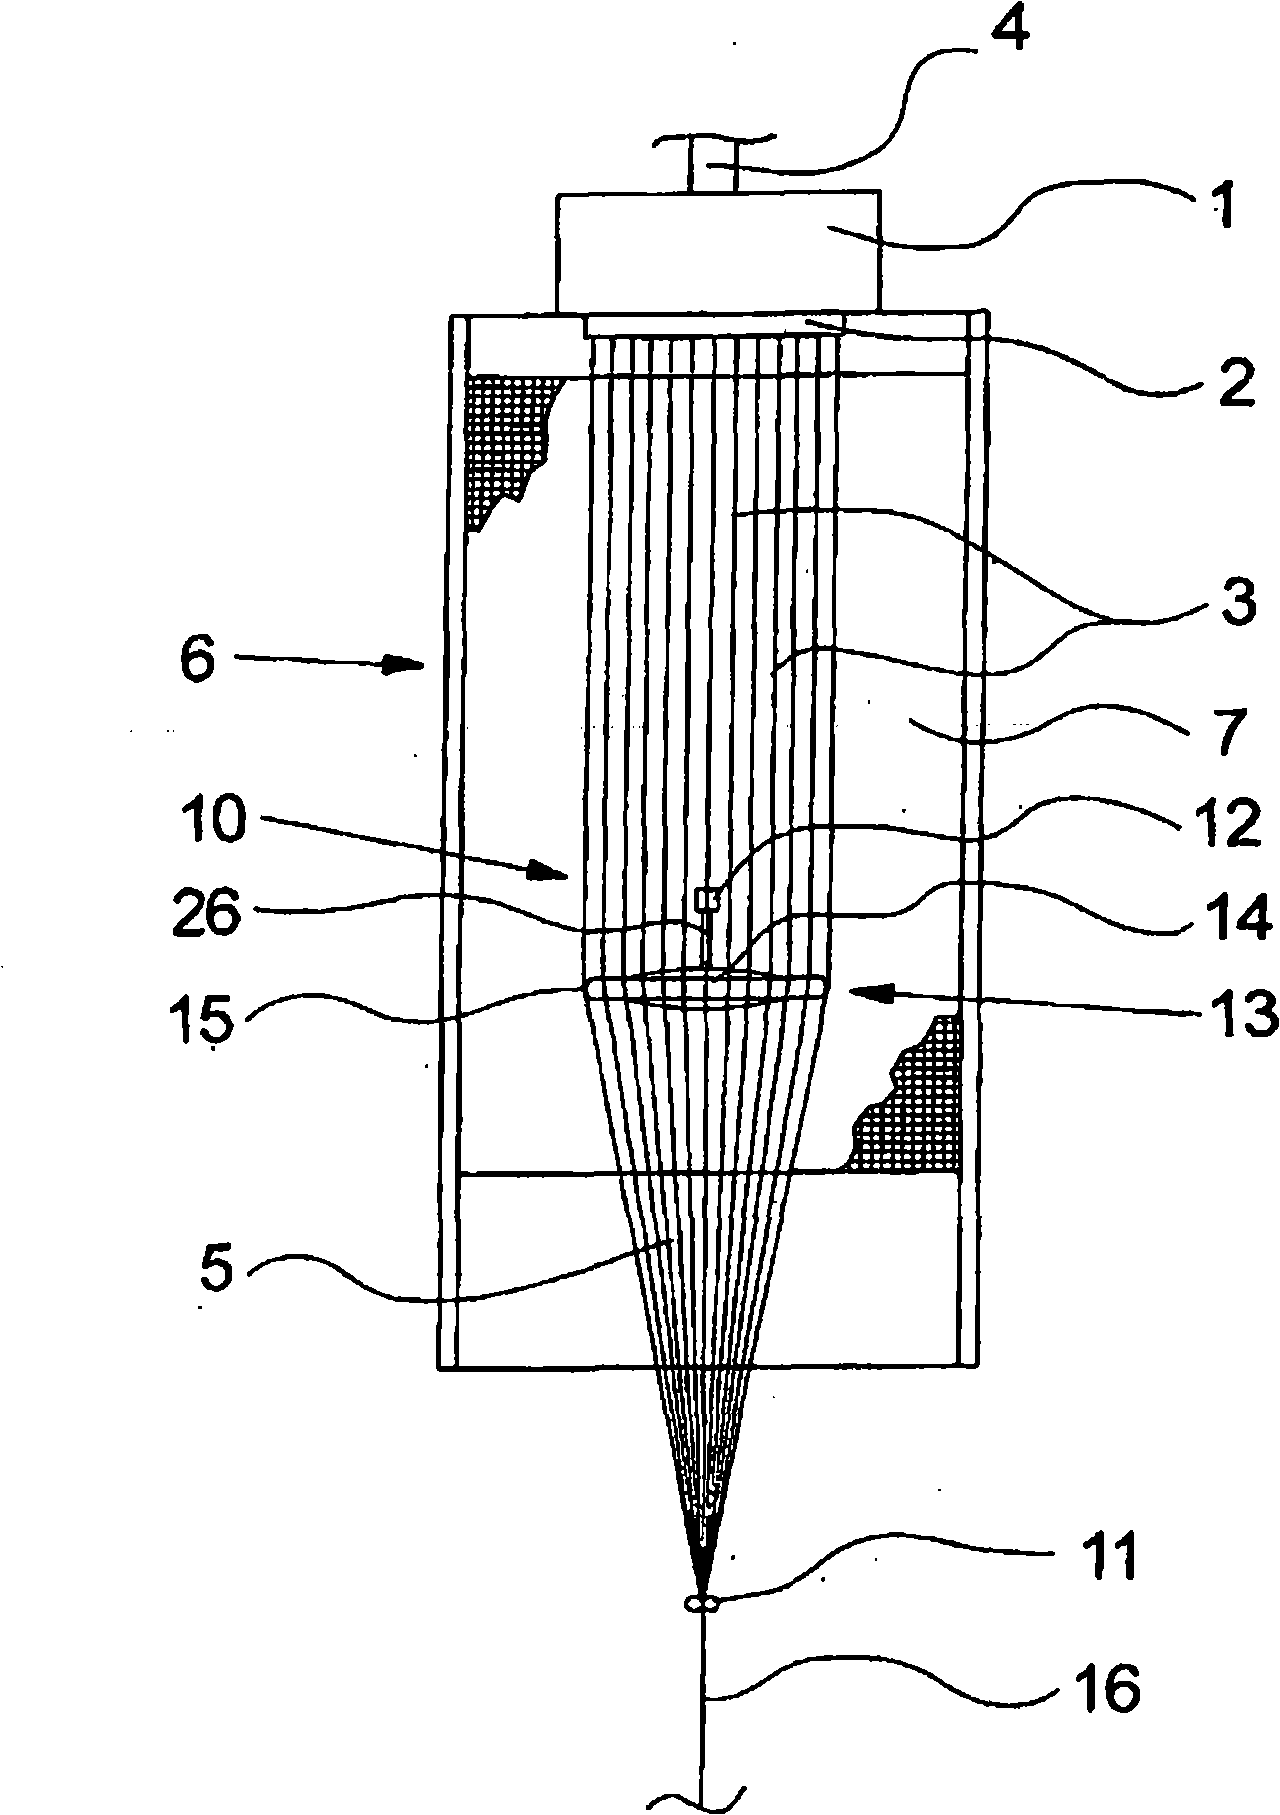 Method and device for melt spinning and cooling a multifilament thread